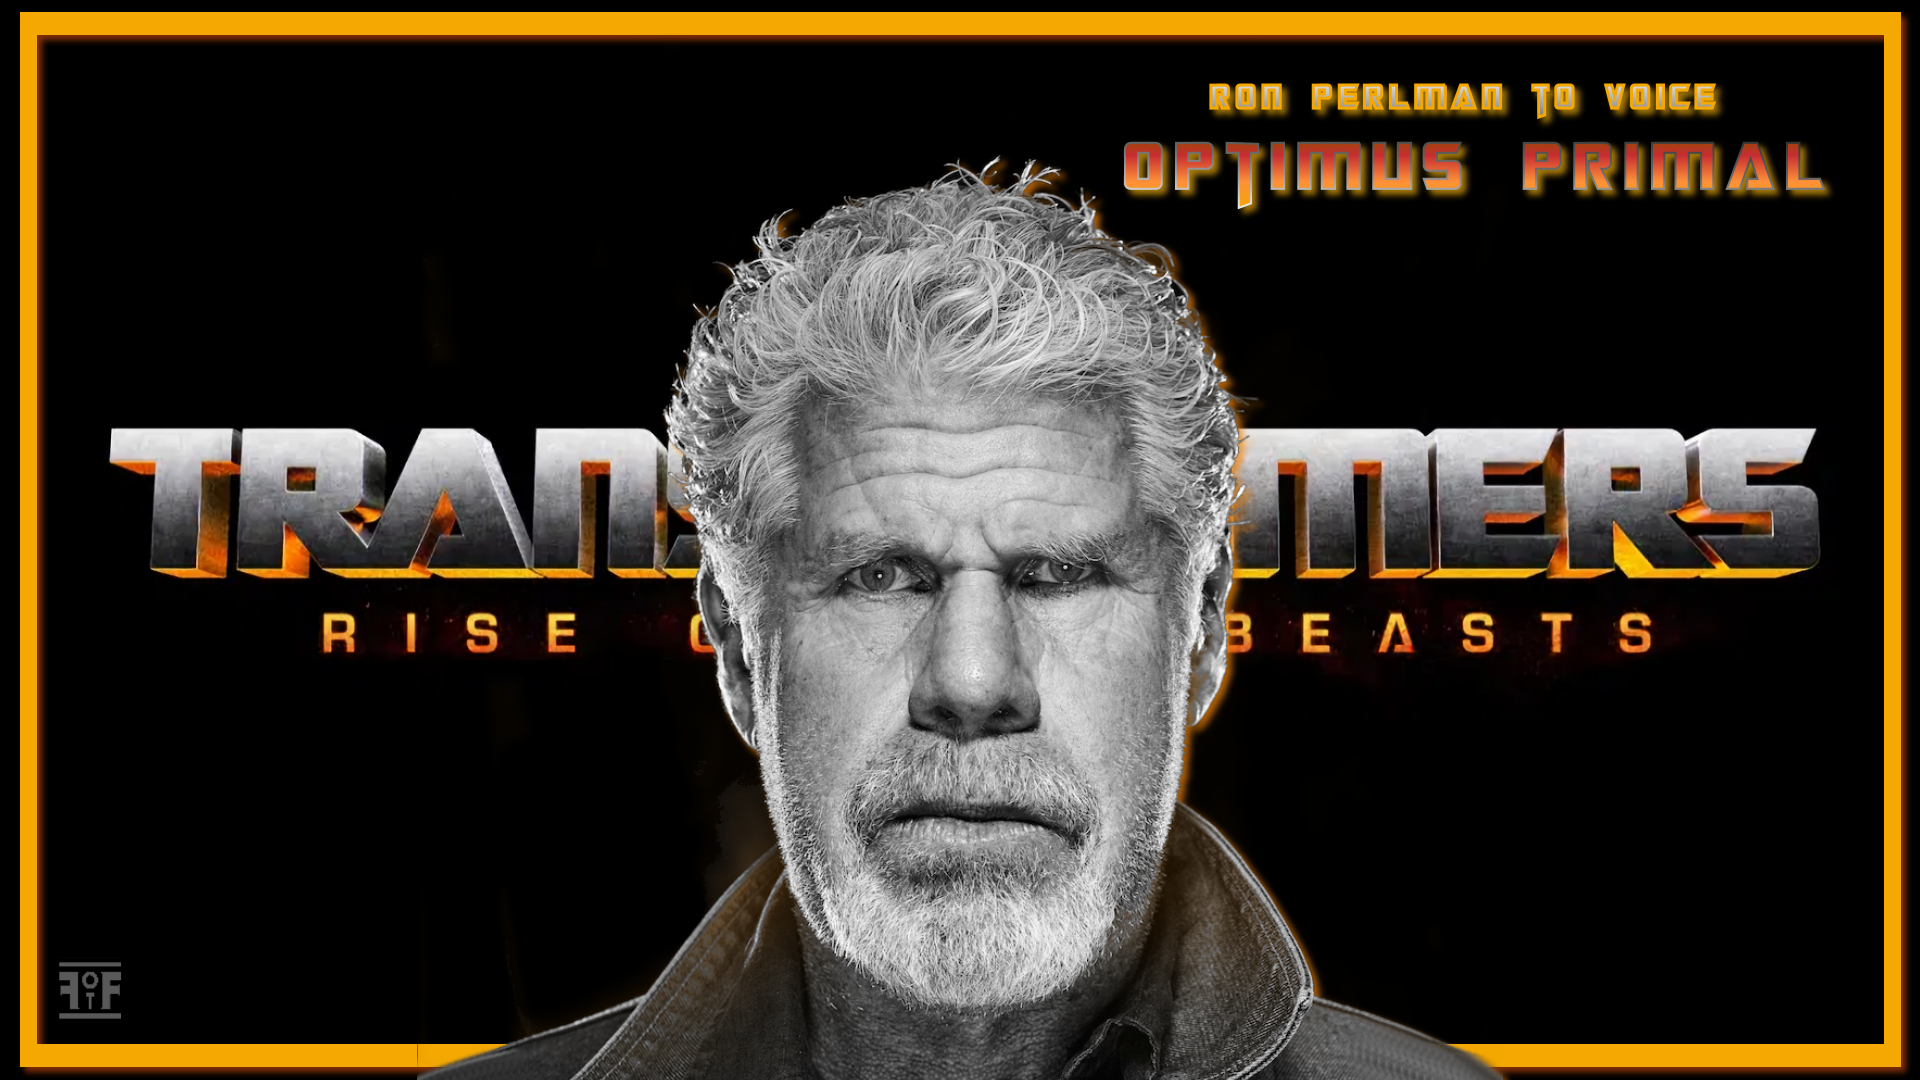 Transformers Rise Of The Beasts. Ron Perlman Cast As Optimus Primal of the Force